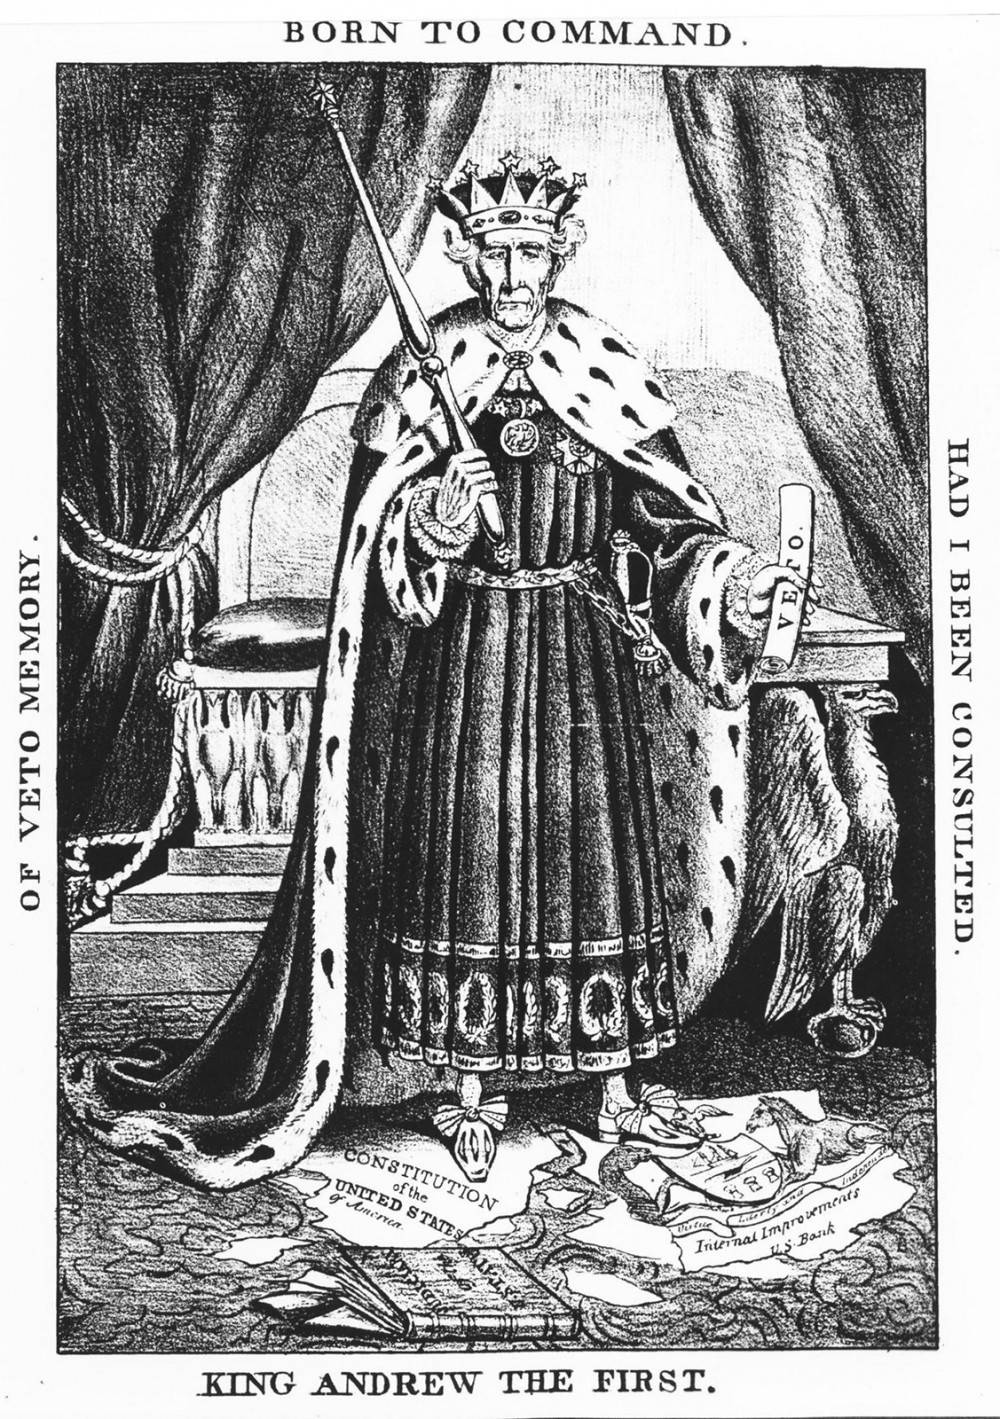 This political cartoon depicts Andrew Jackson as a king. He holds the veto in one hand and stands on top of the shredded Constitution and legislation labeled "internal improvements." The border of the image says King Andrew the First, Born to Command, Hand I Been Consulted, Of Veto Memory. 